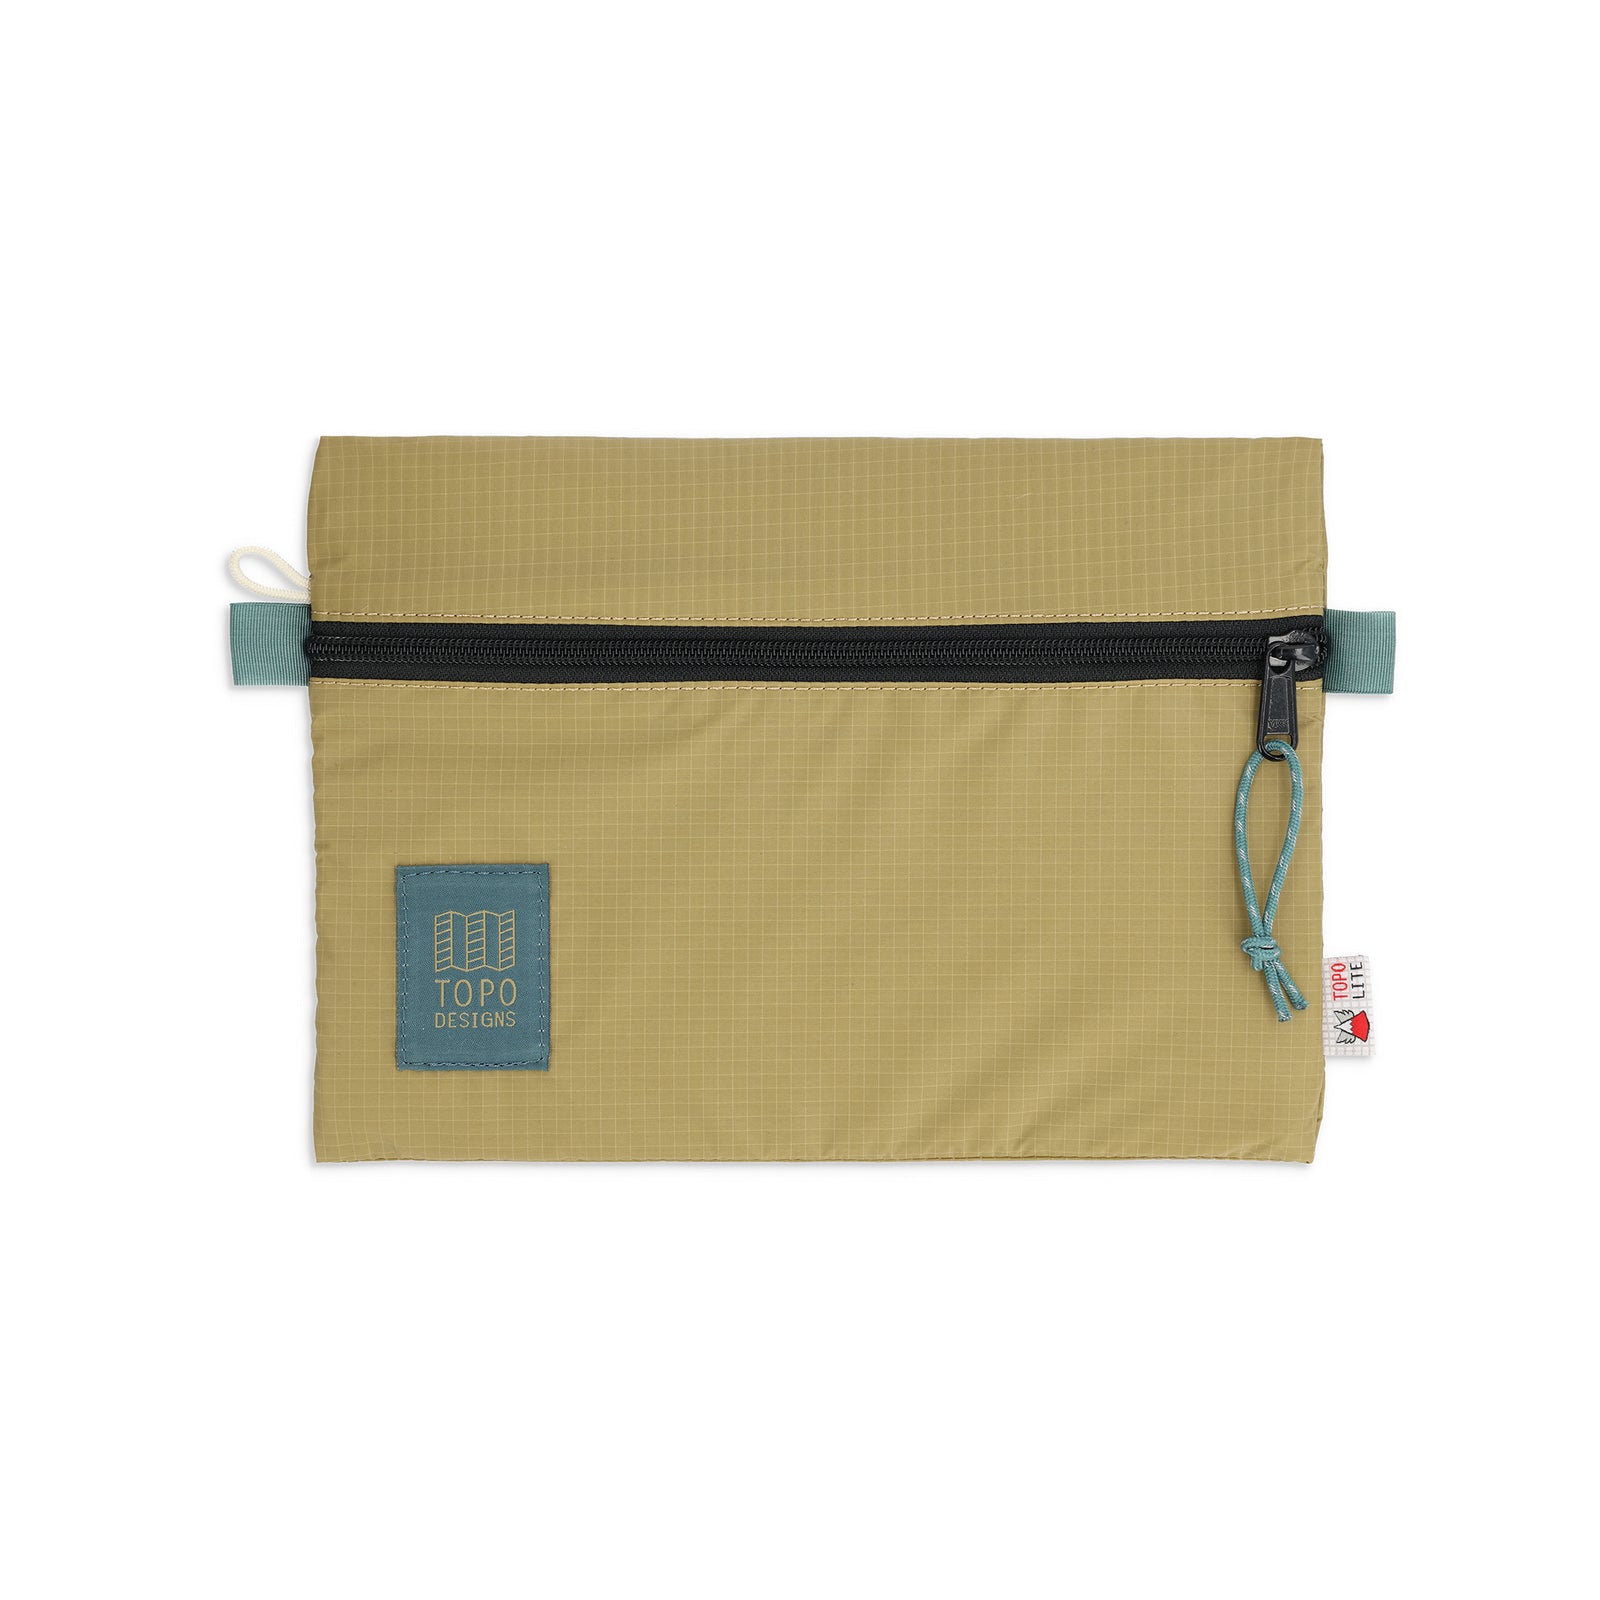 Front View of Topo Designs Topolite™ Accessory Bag in "Moss"